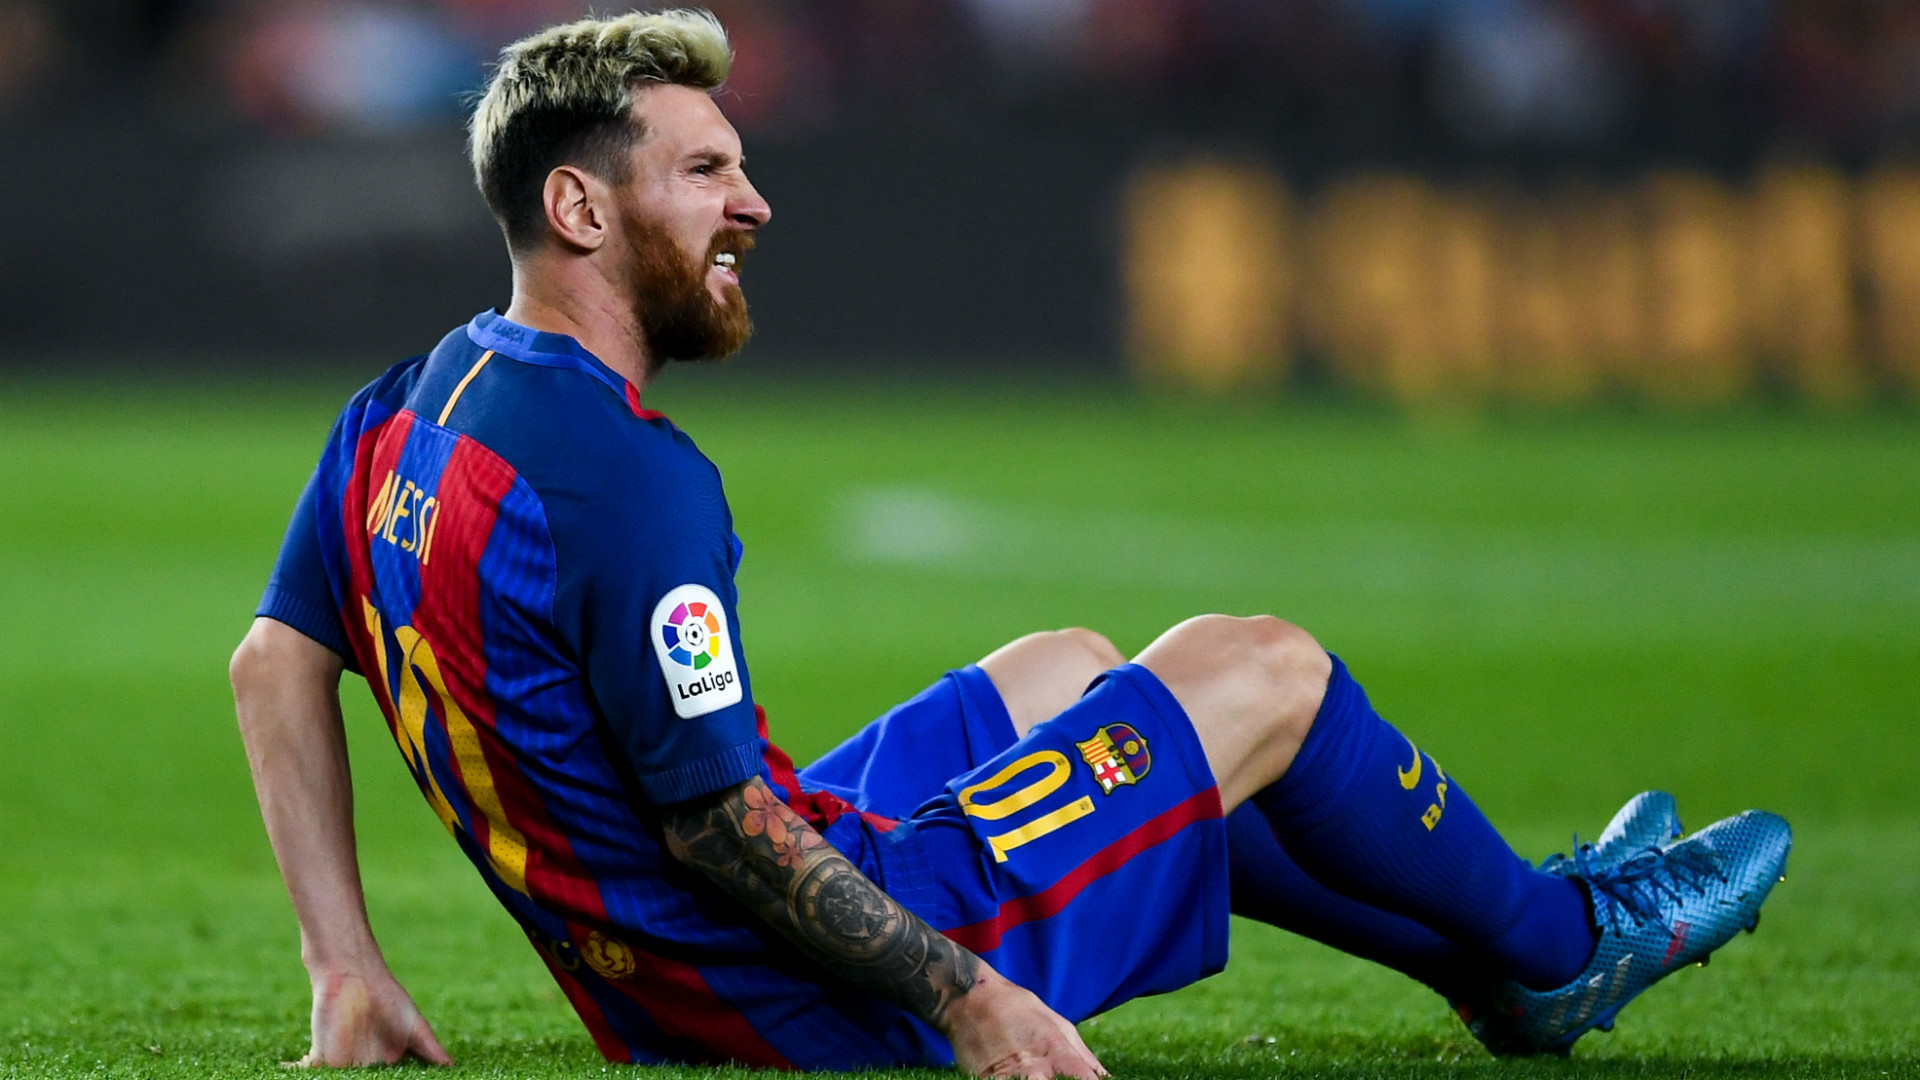 1920x1080 Transfer news: Messi wants release clause in new Barcelona deal - Goal.com